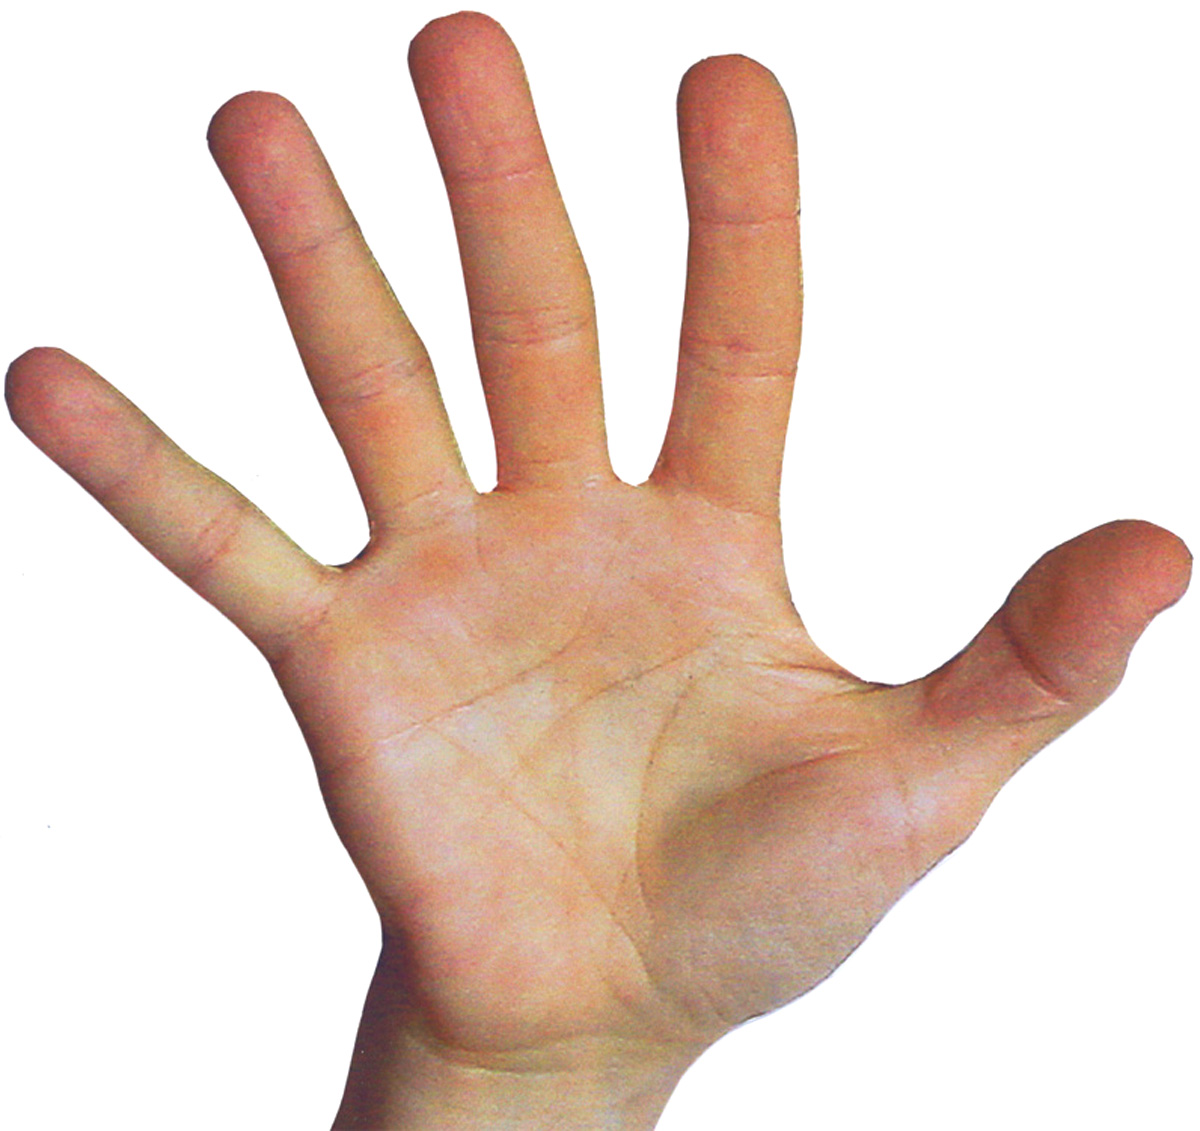 Fingers and Planets - Mark Seltman's Real Palmistry BlogMark Seltman's